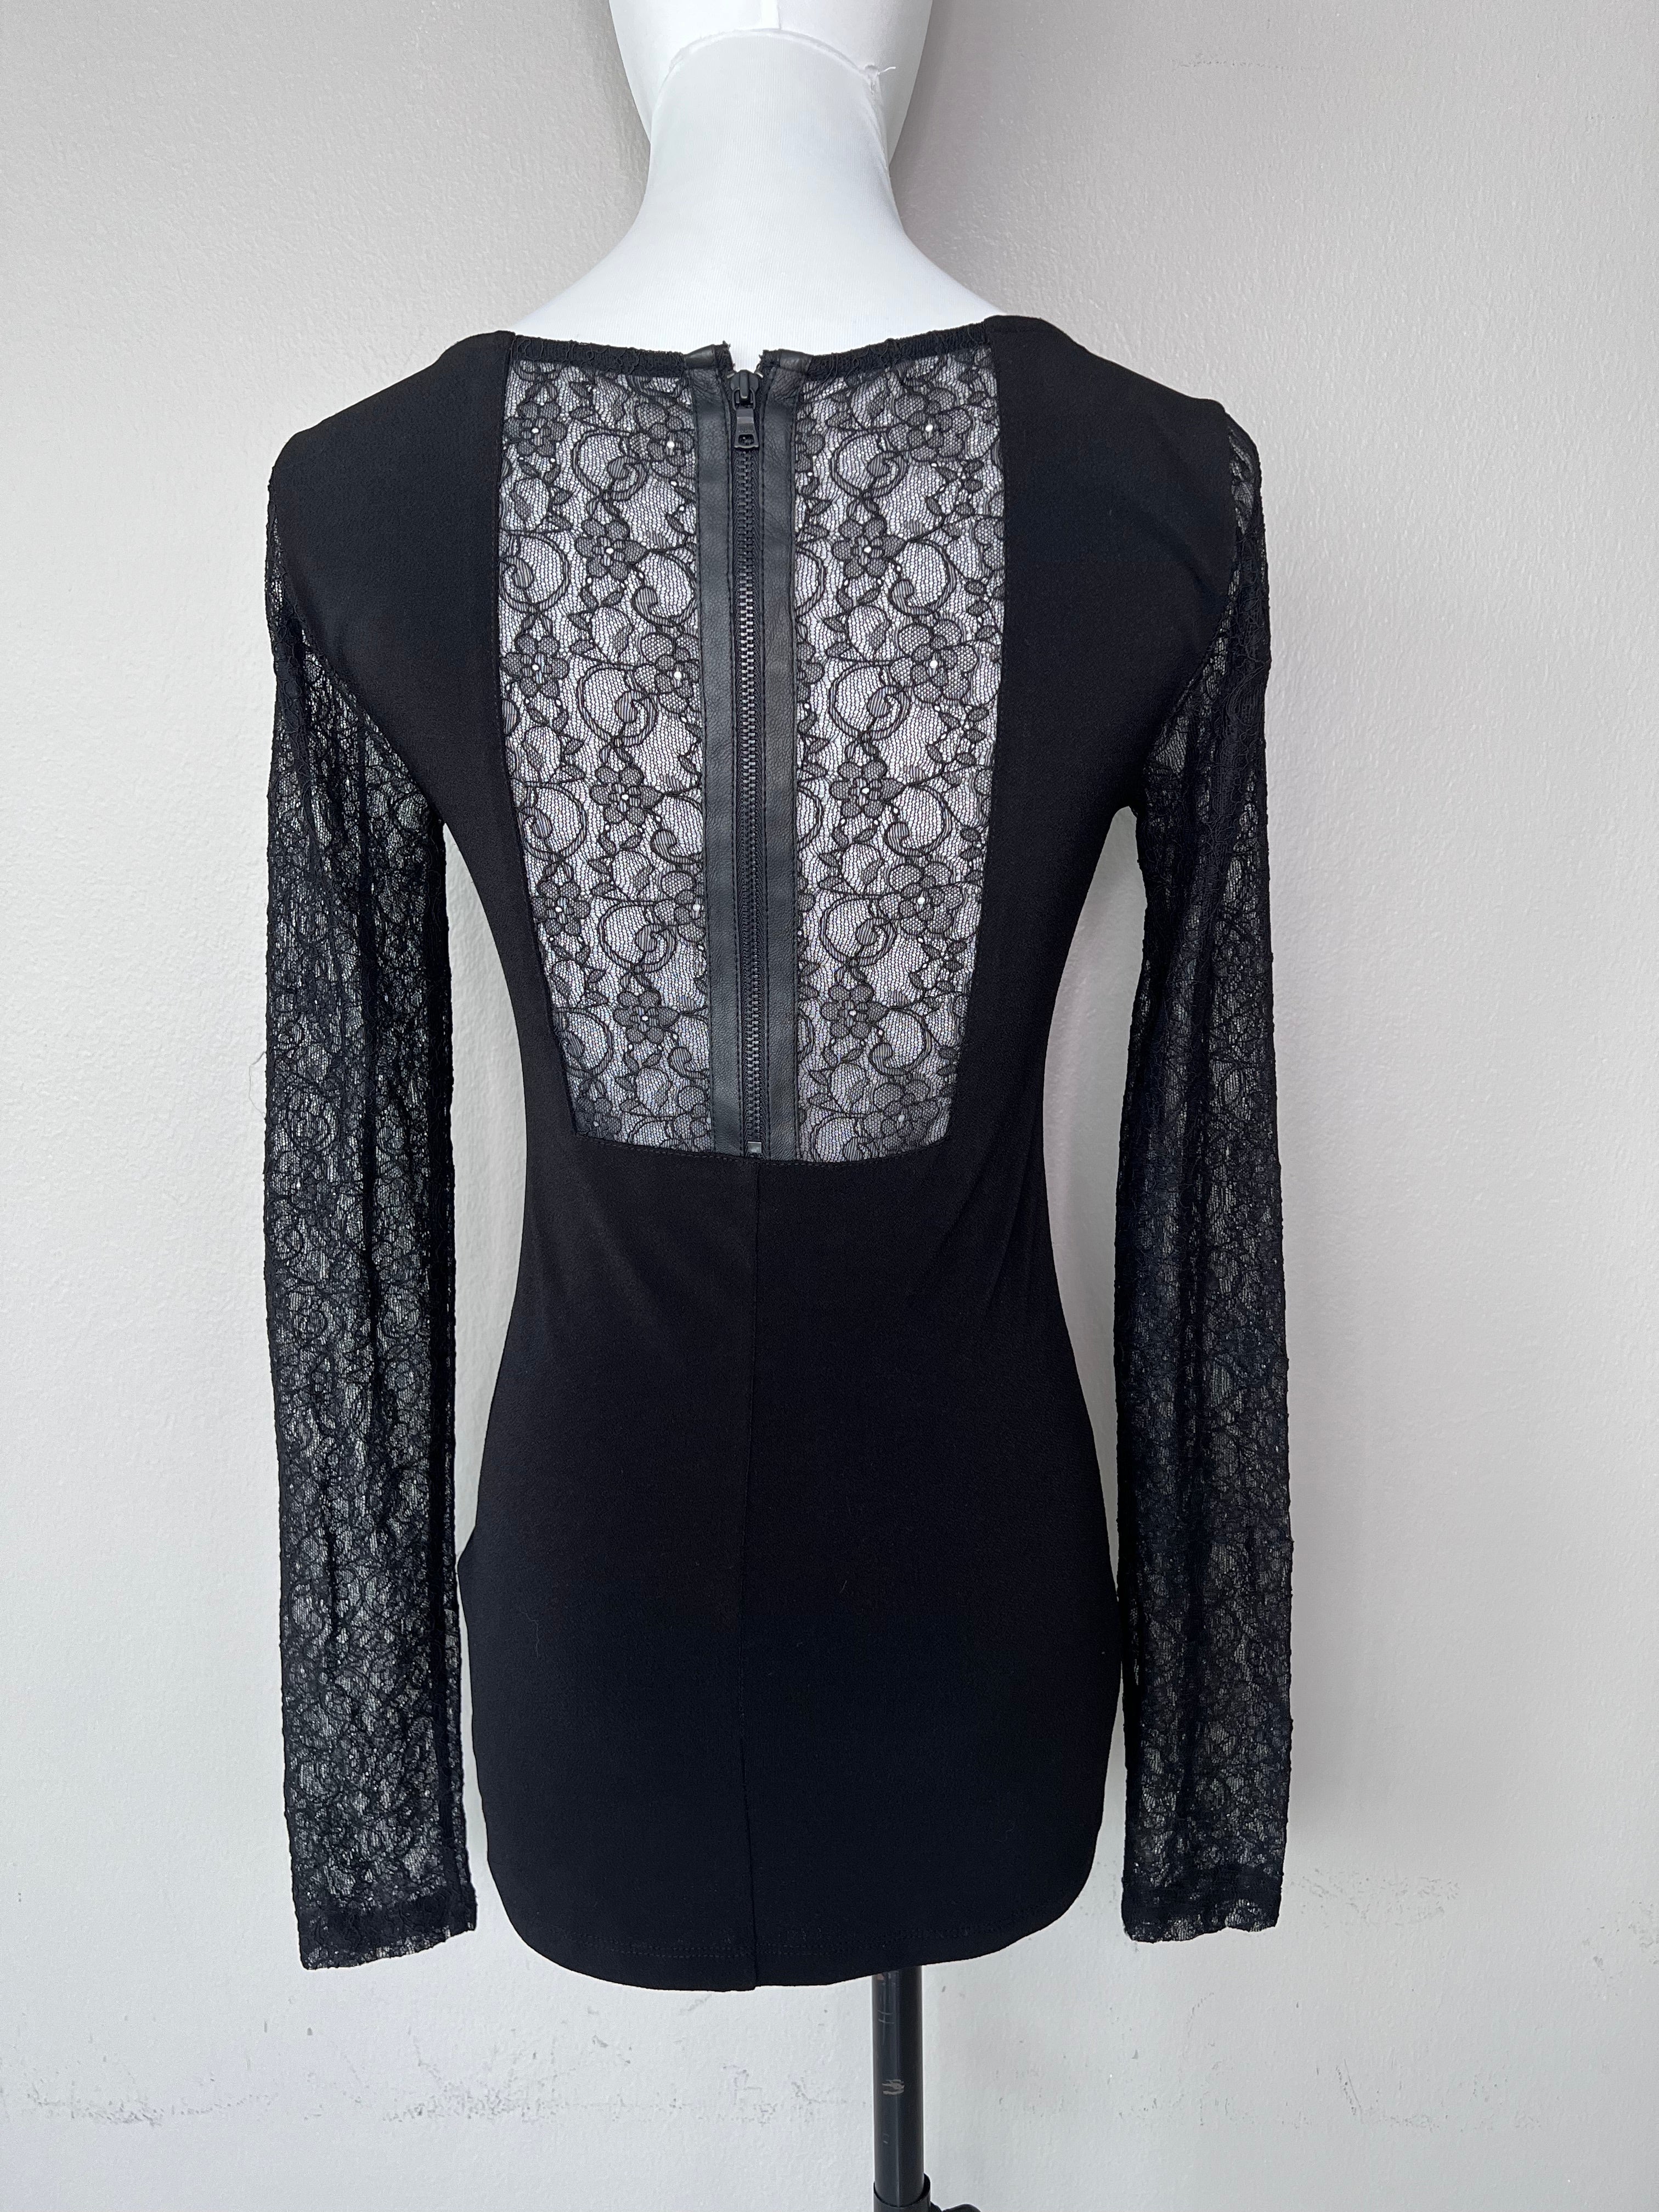 Black fitted long sleeve top with lace details - ALICE + OLIVIA